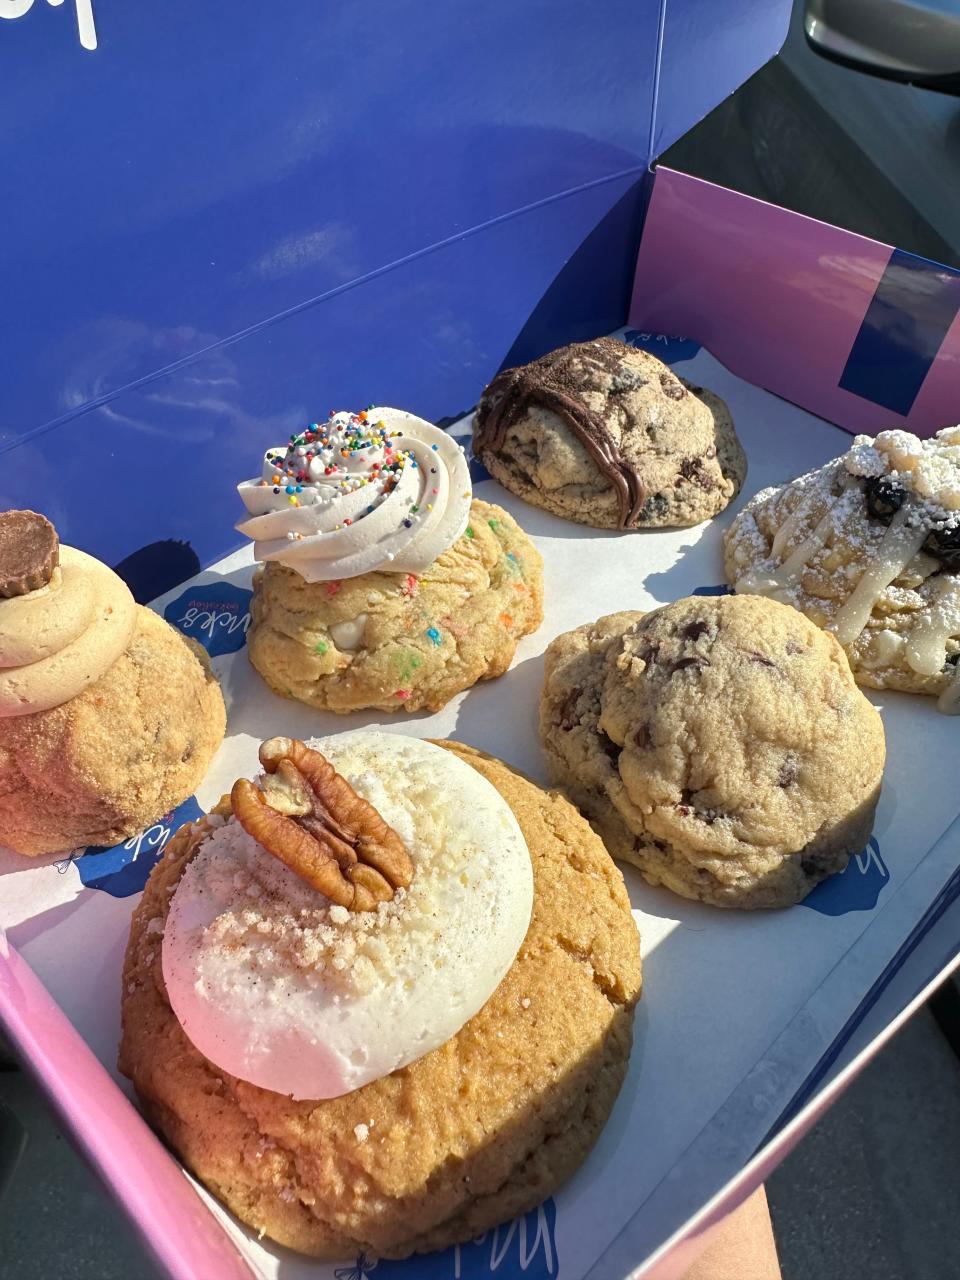 With taste temptations including classic chocolate chip, peanut butter cheesecake, apple crumble, salty caramel pistachio and many more, Mcks' Bakeshop at Grandview Public Market is known for creating sophisticated flavor profiles.